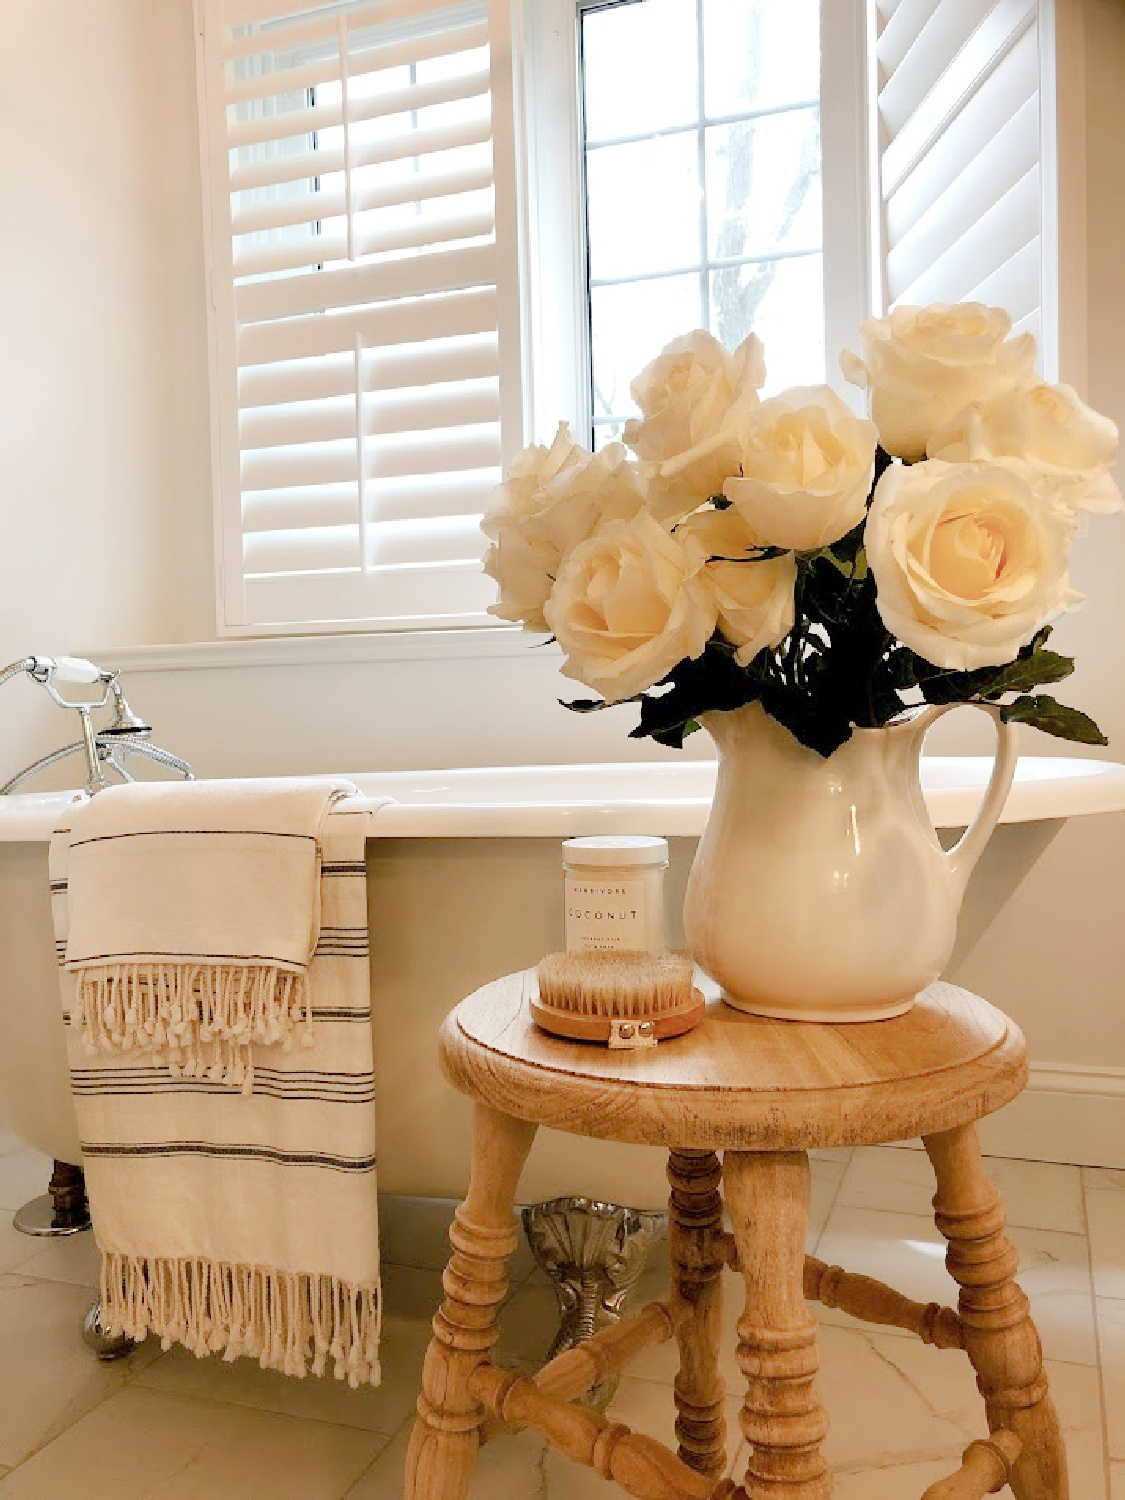 French country white bathroom with maids tub, accent stool, and white roses - Hello Lovely. Come see 33 Tempting French Farmhouse Decor Finds & Quotes to Pin Now!